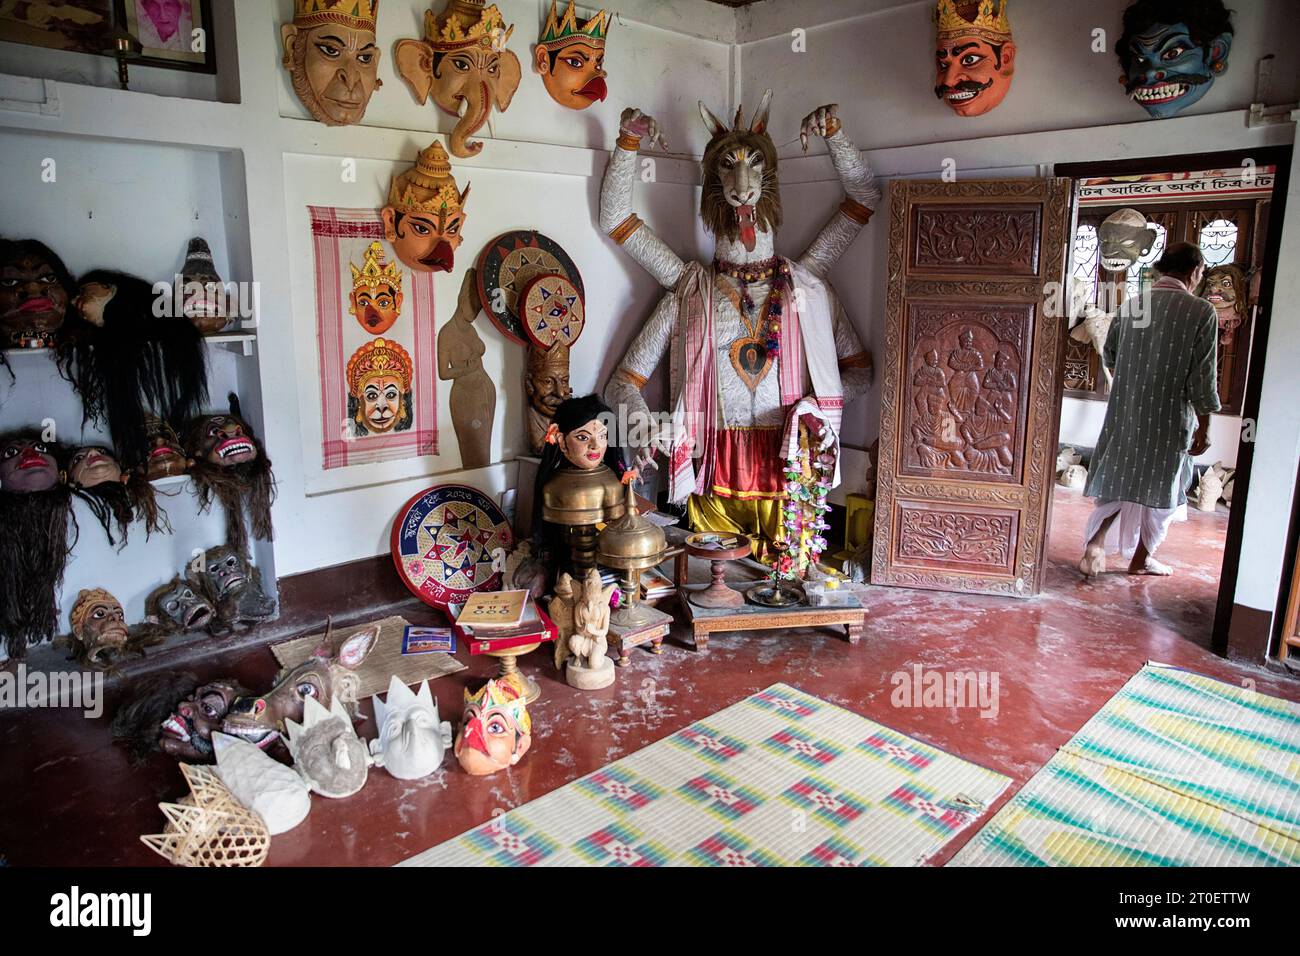 Room full of traditional masks made by world famous mask maker Hem Chandra Goswami, that is leaving the room, on Majuli island in Assam, India Stock Photo